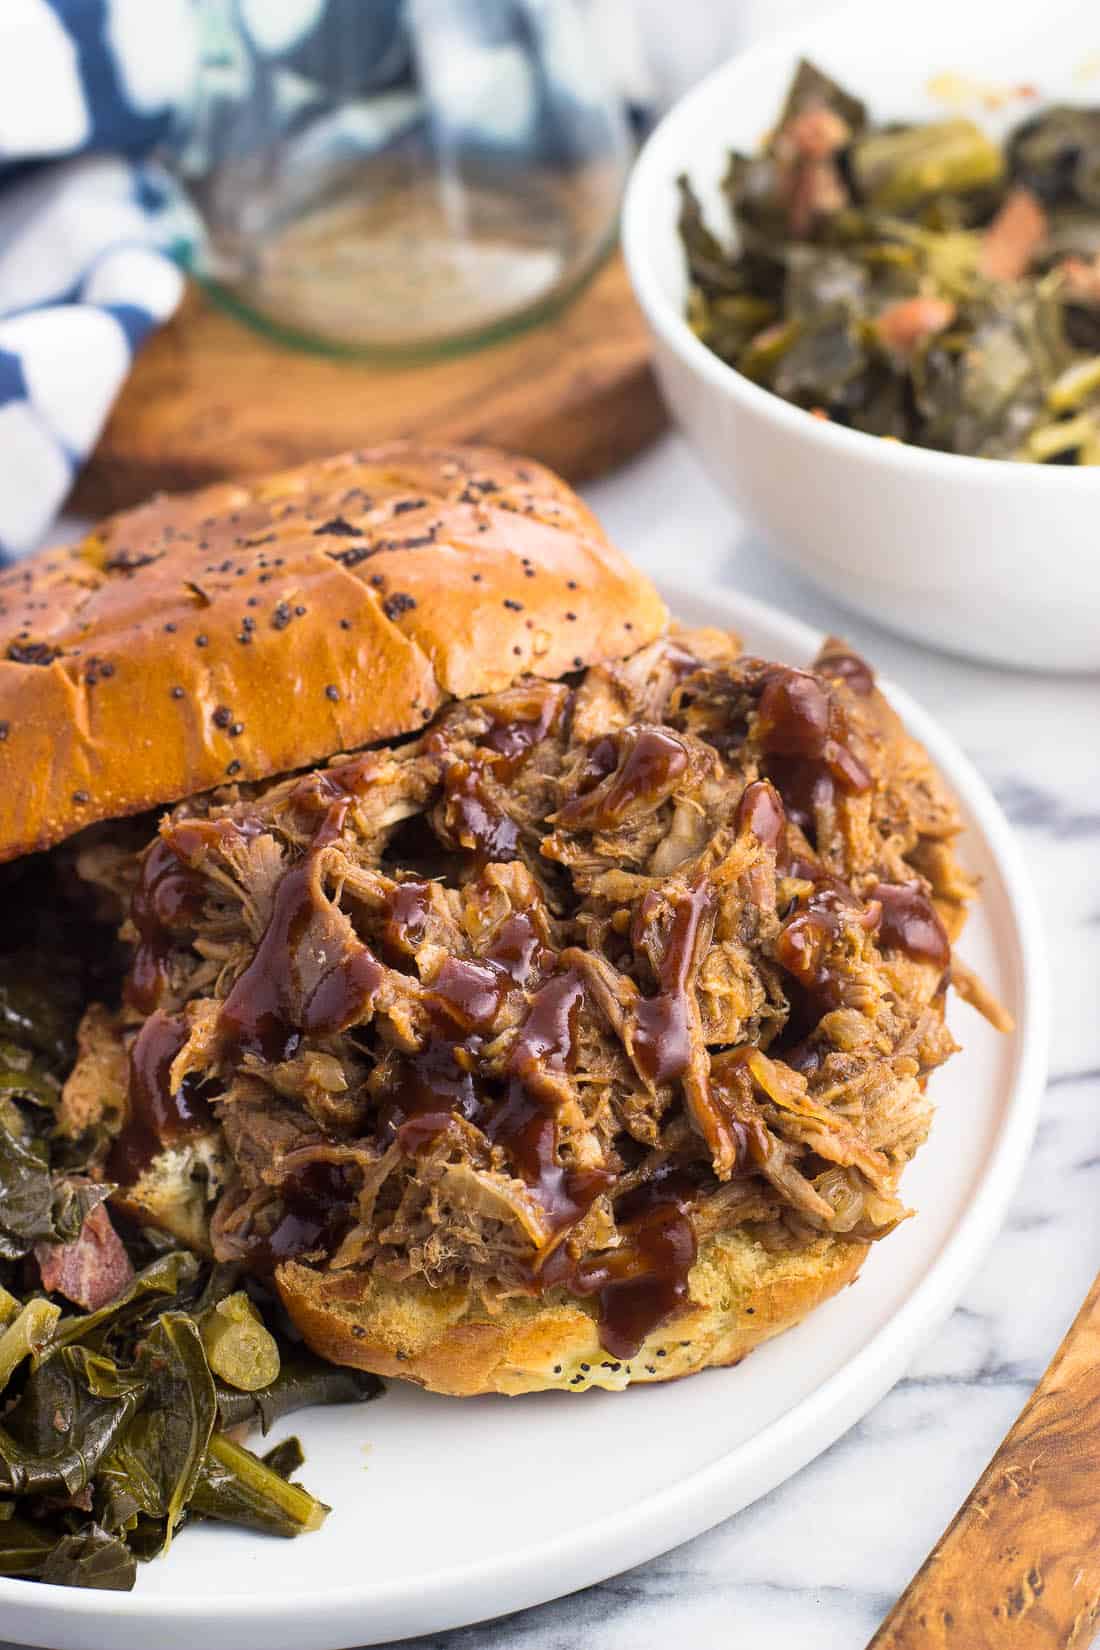 Slow cooker pulled pork drizzled with BBQ sauce on an onion roll served next to southern greens